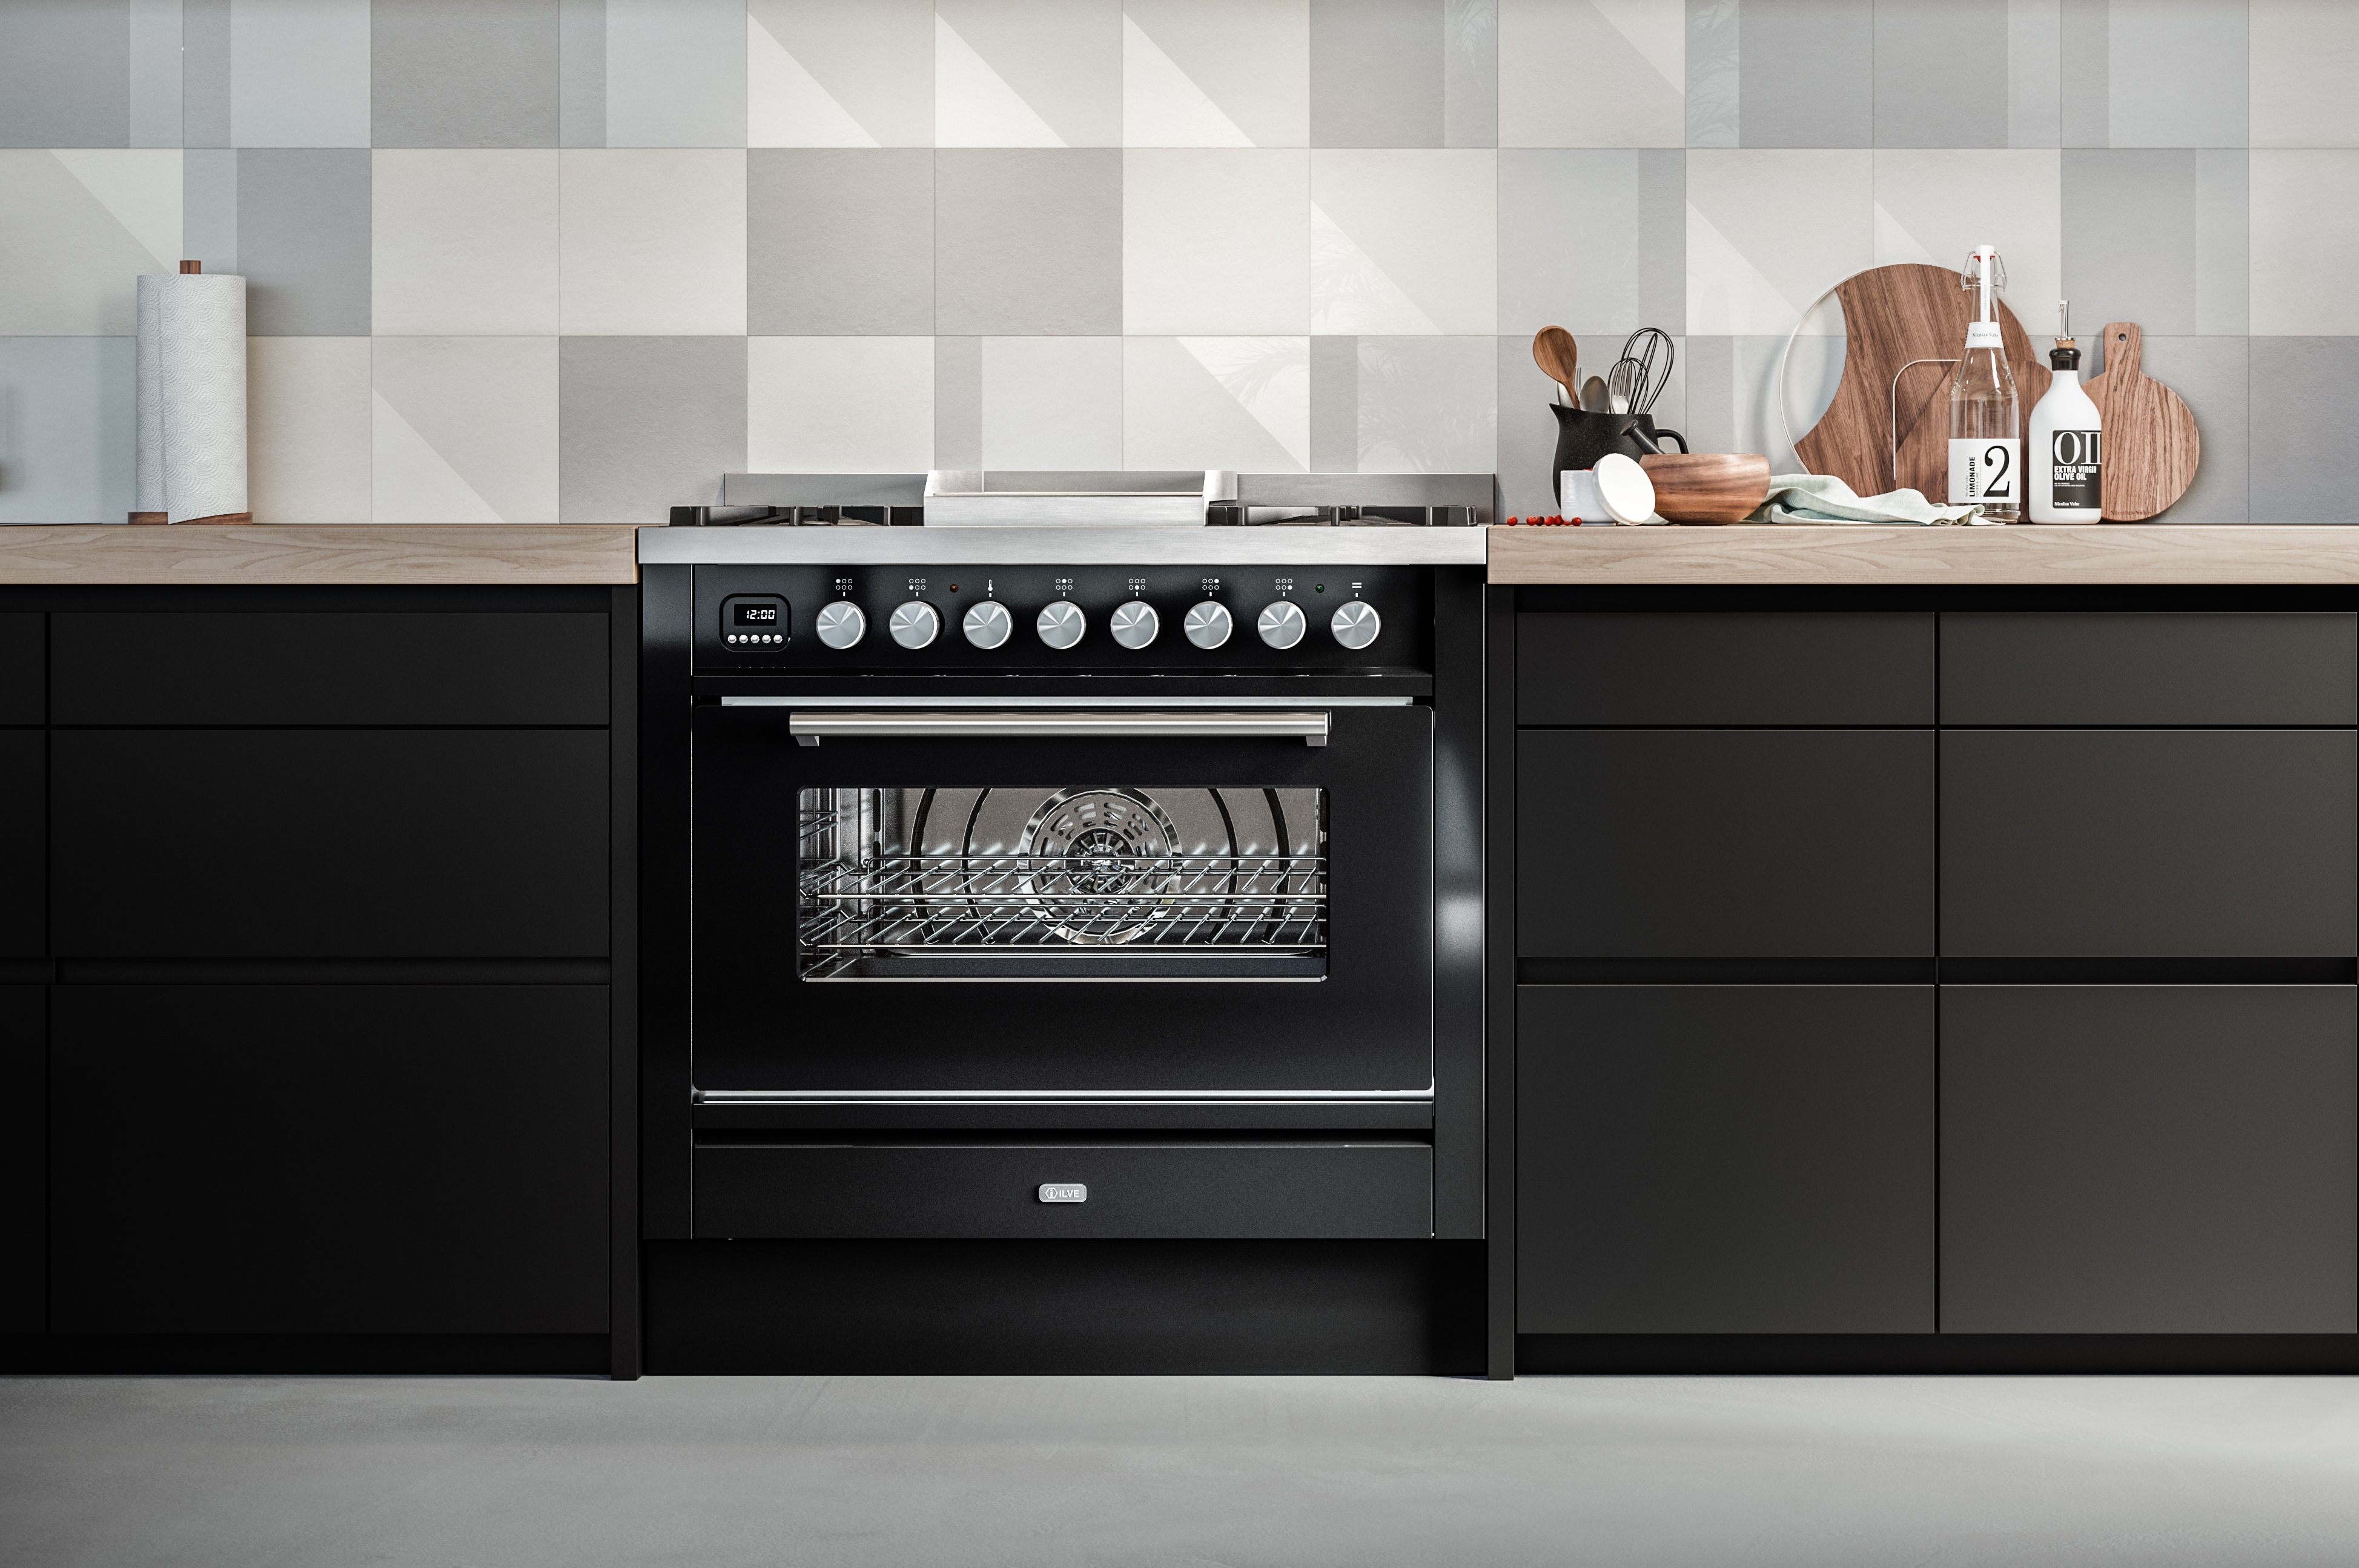 Receive 50% off an accompanying Ilve Rangehood with the purchase of any Professional Plus Series Cooker at Hart & Co